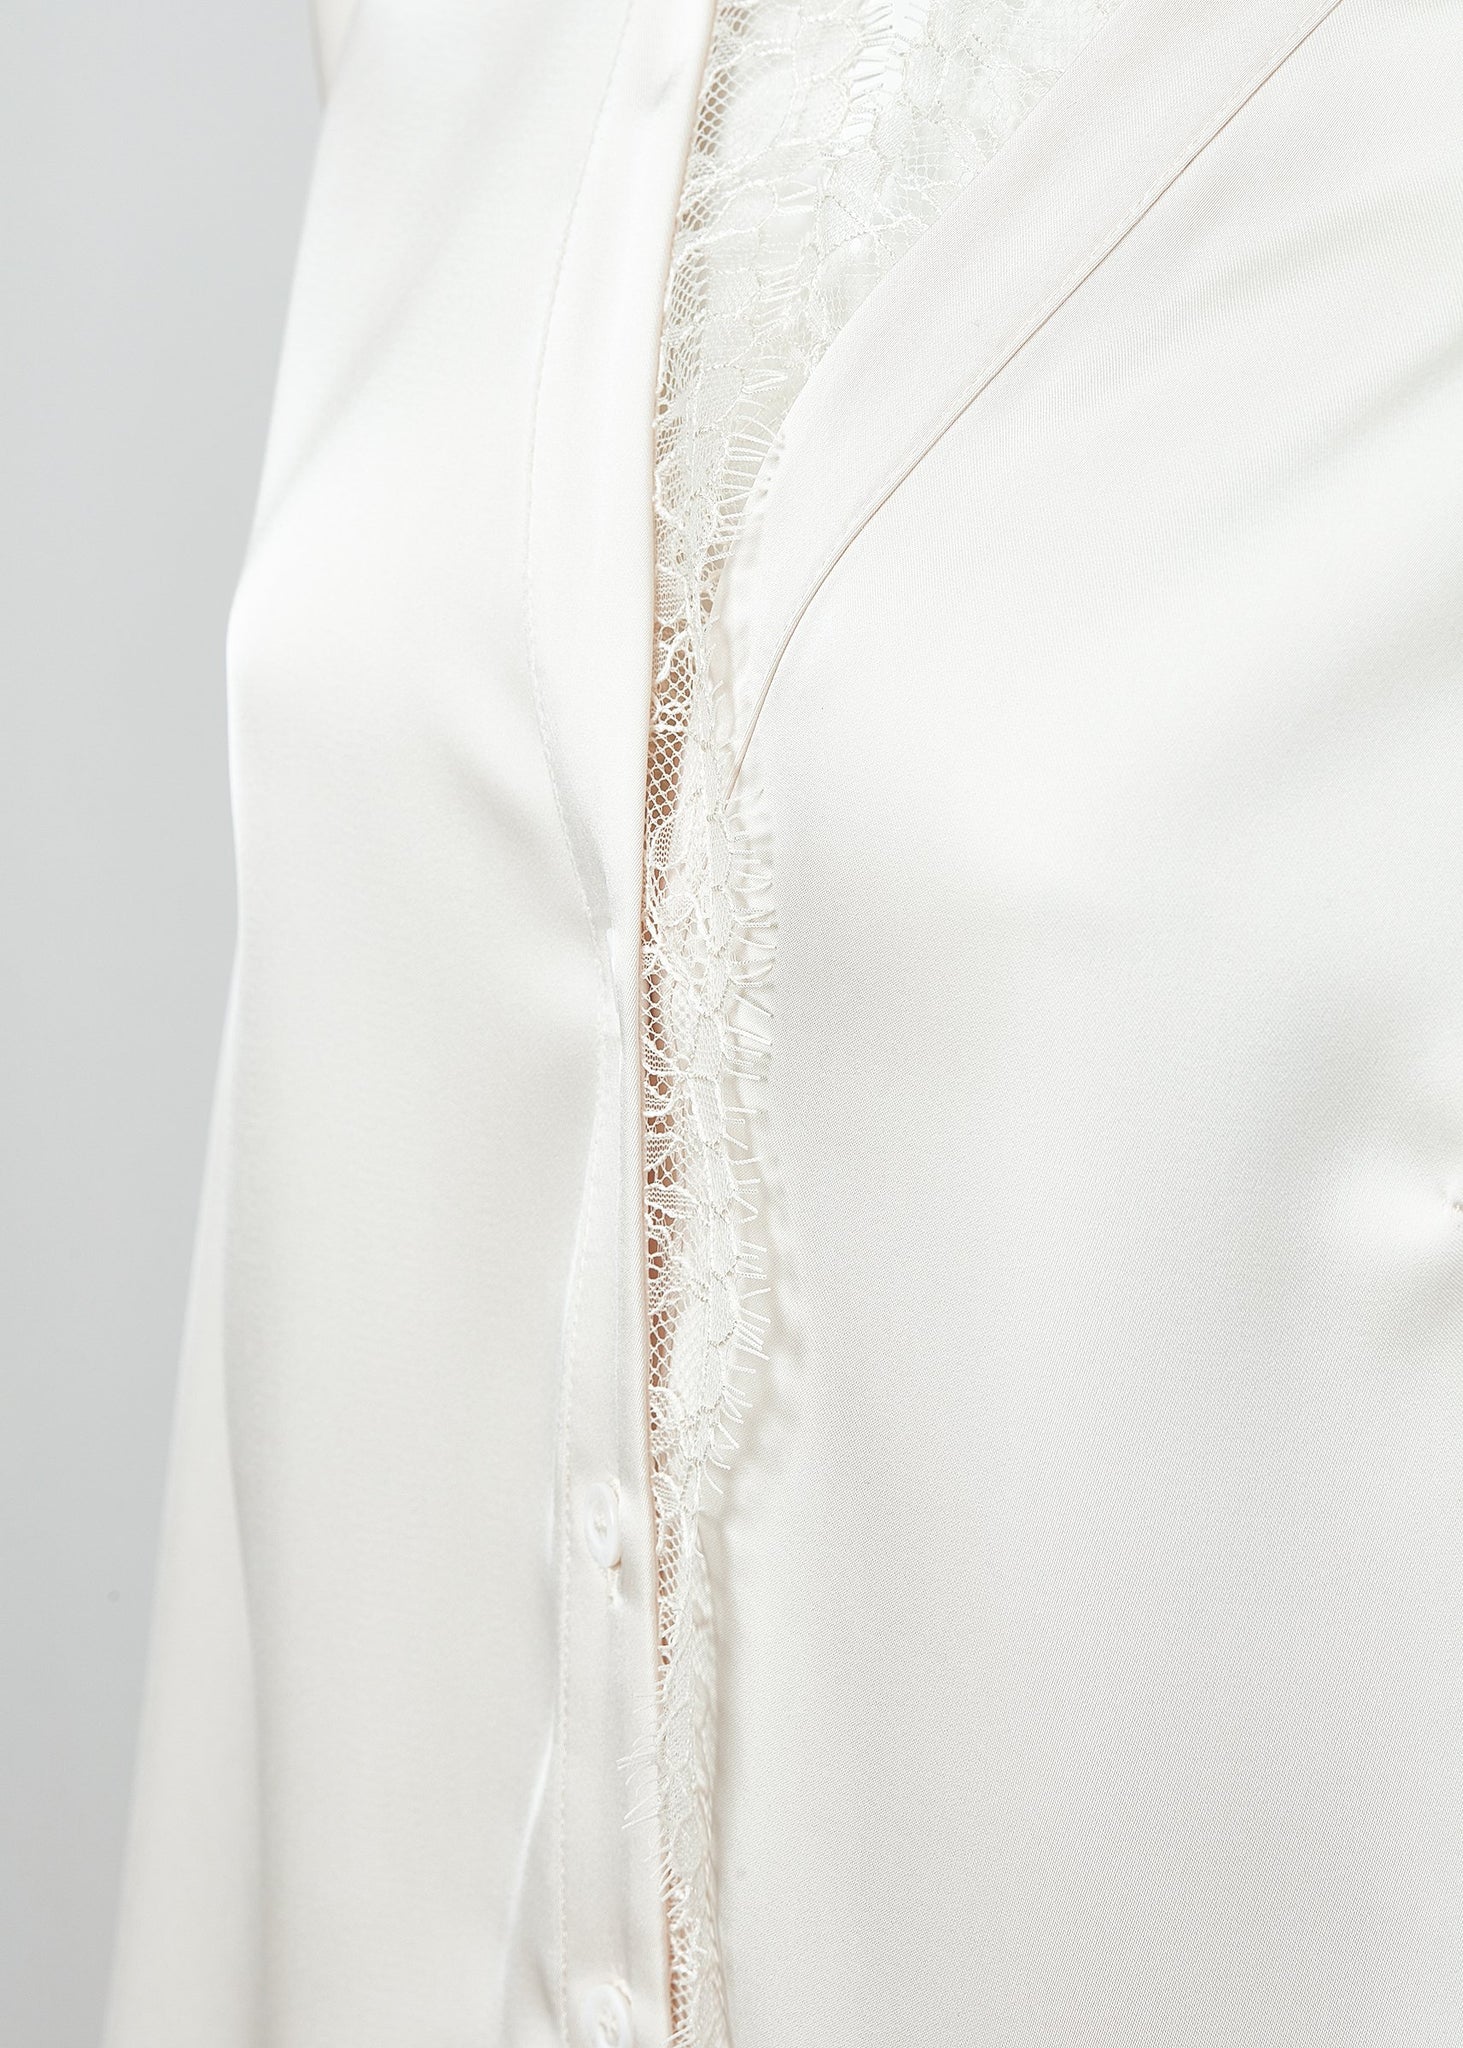 lace detail on womens white long sleeve silk v neck blouse with white lace hem details